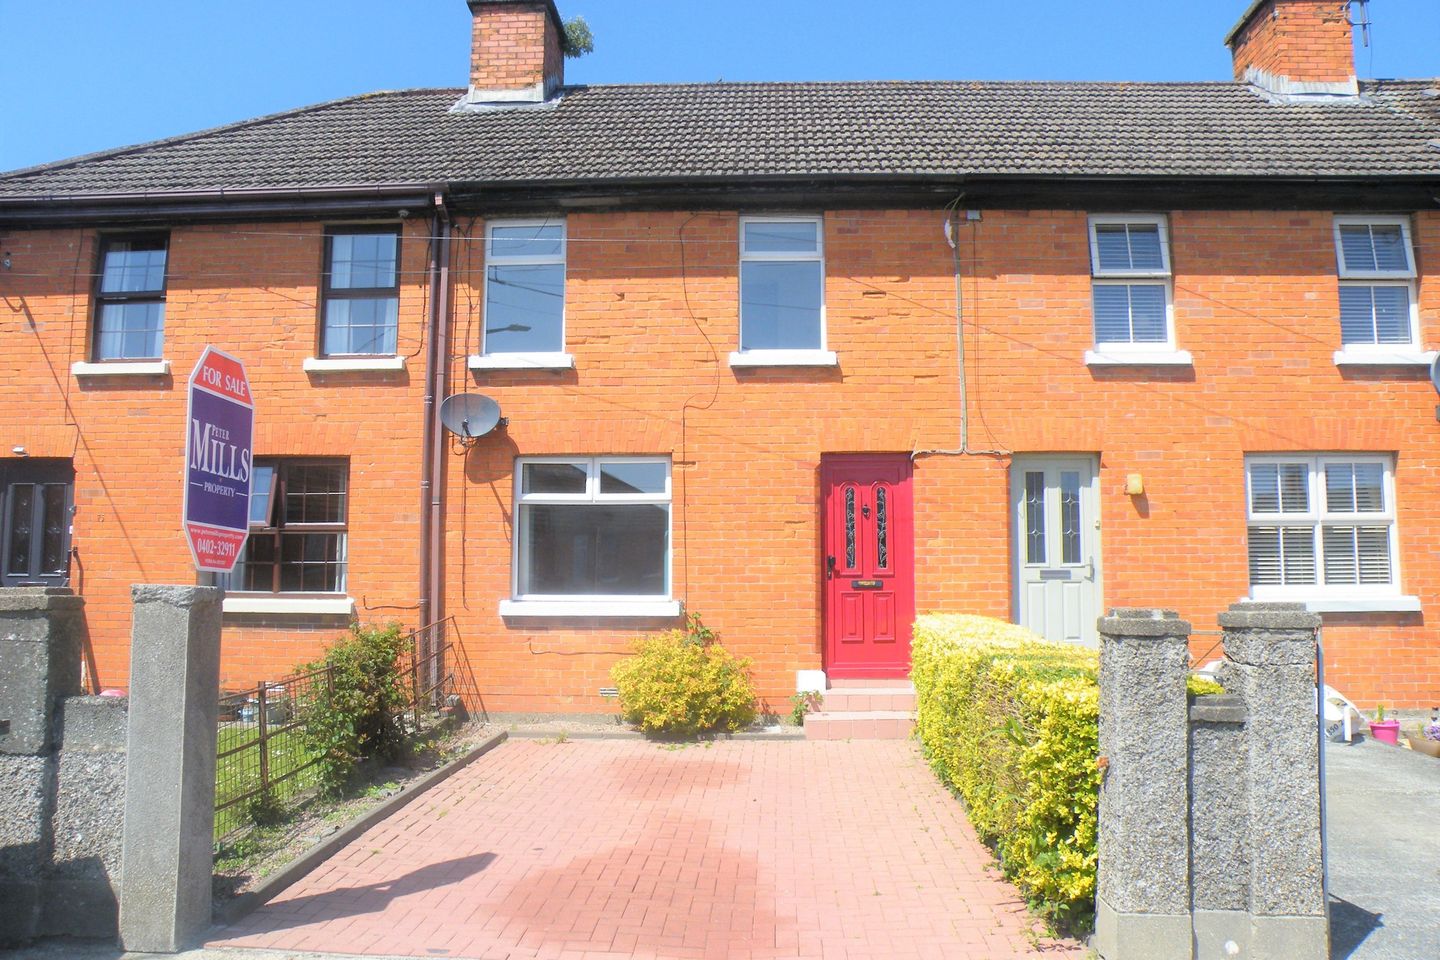 76 Rory O'Connor Place, Arklow, Co. Wicklow